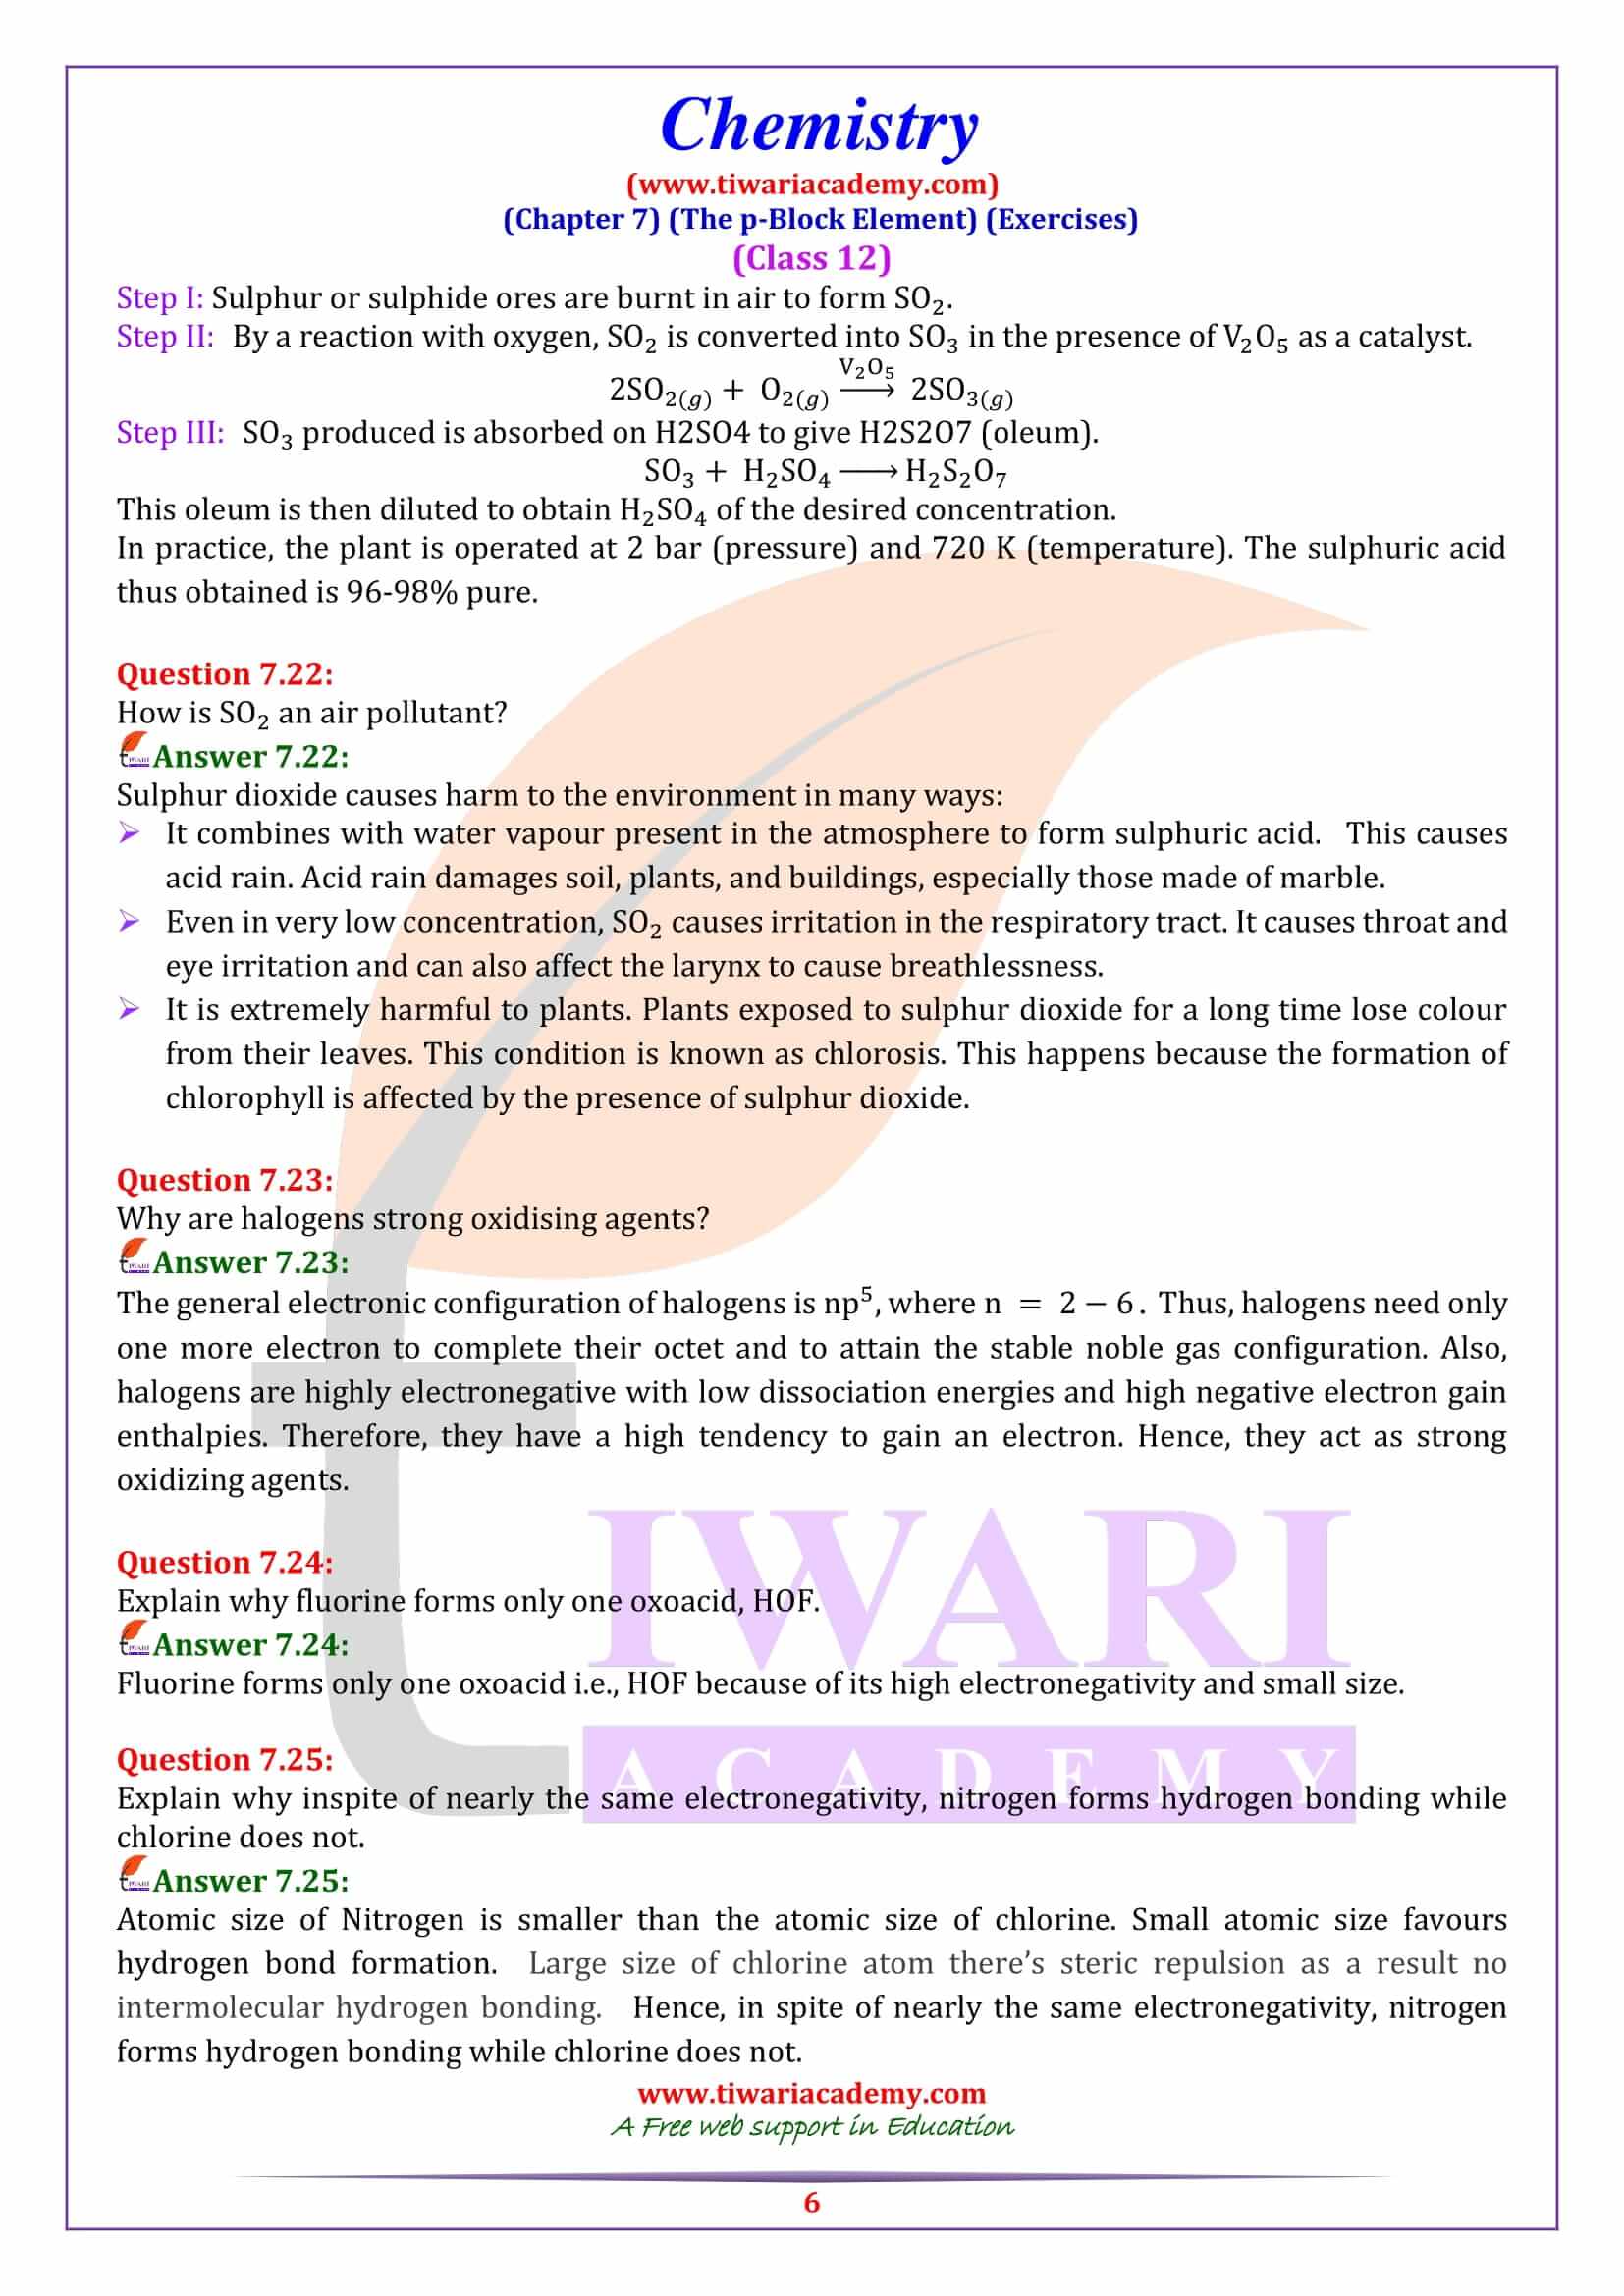 NCERT Solutions for Class 12 Chemistry Chapter 7 guide